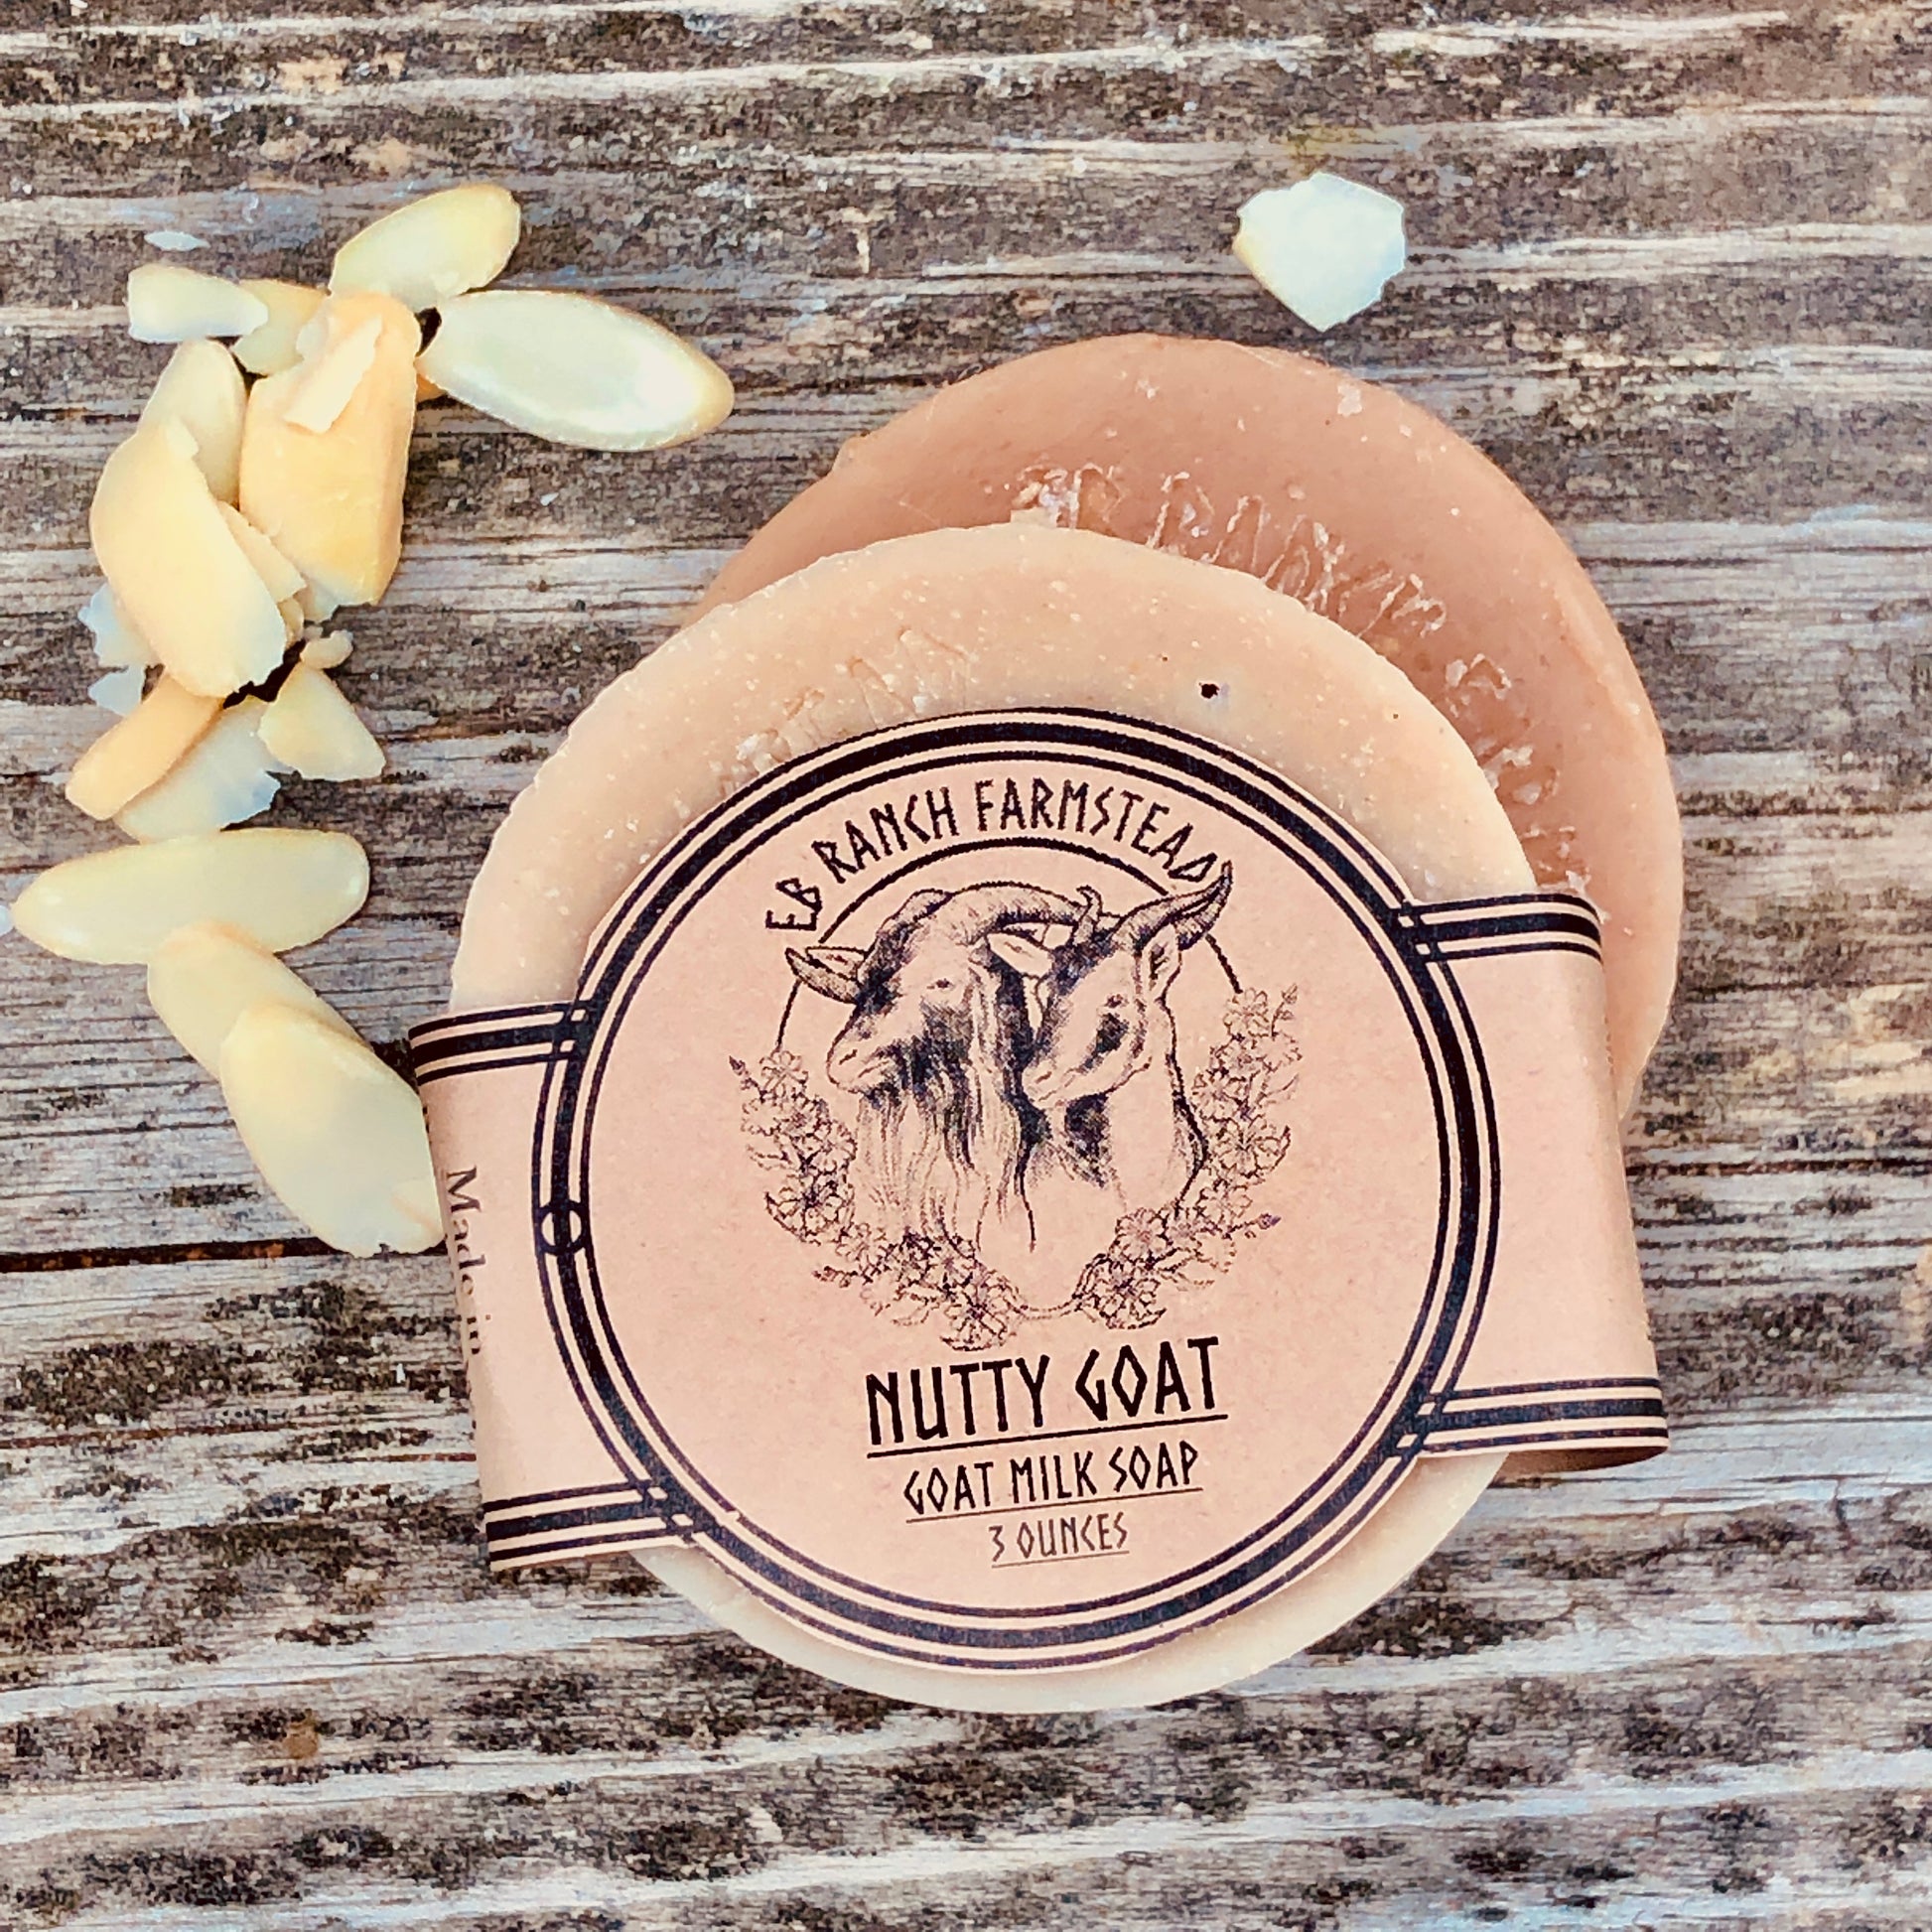 Bar of Wild Haven Farm's Nutty Goat goat milk soap made with San Clemente Island goat milk